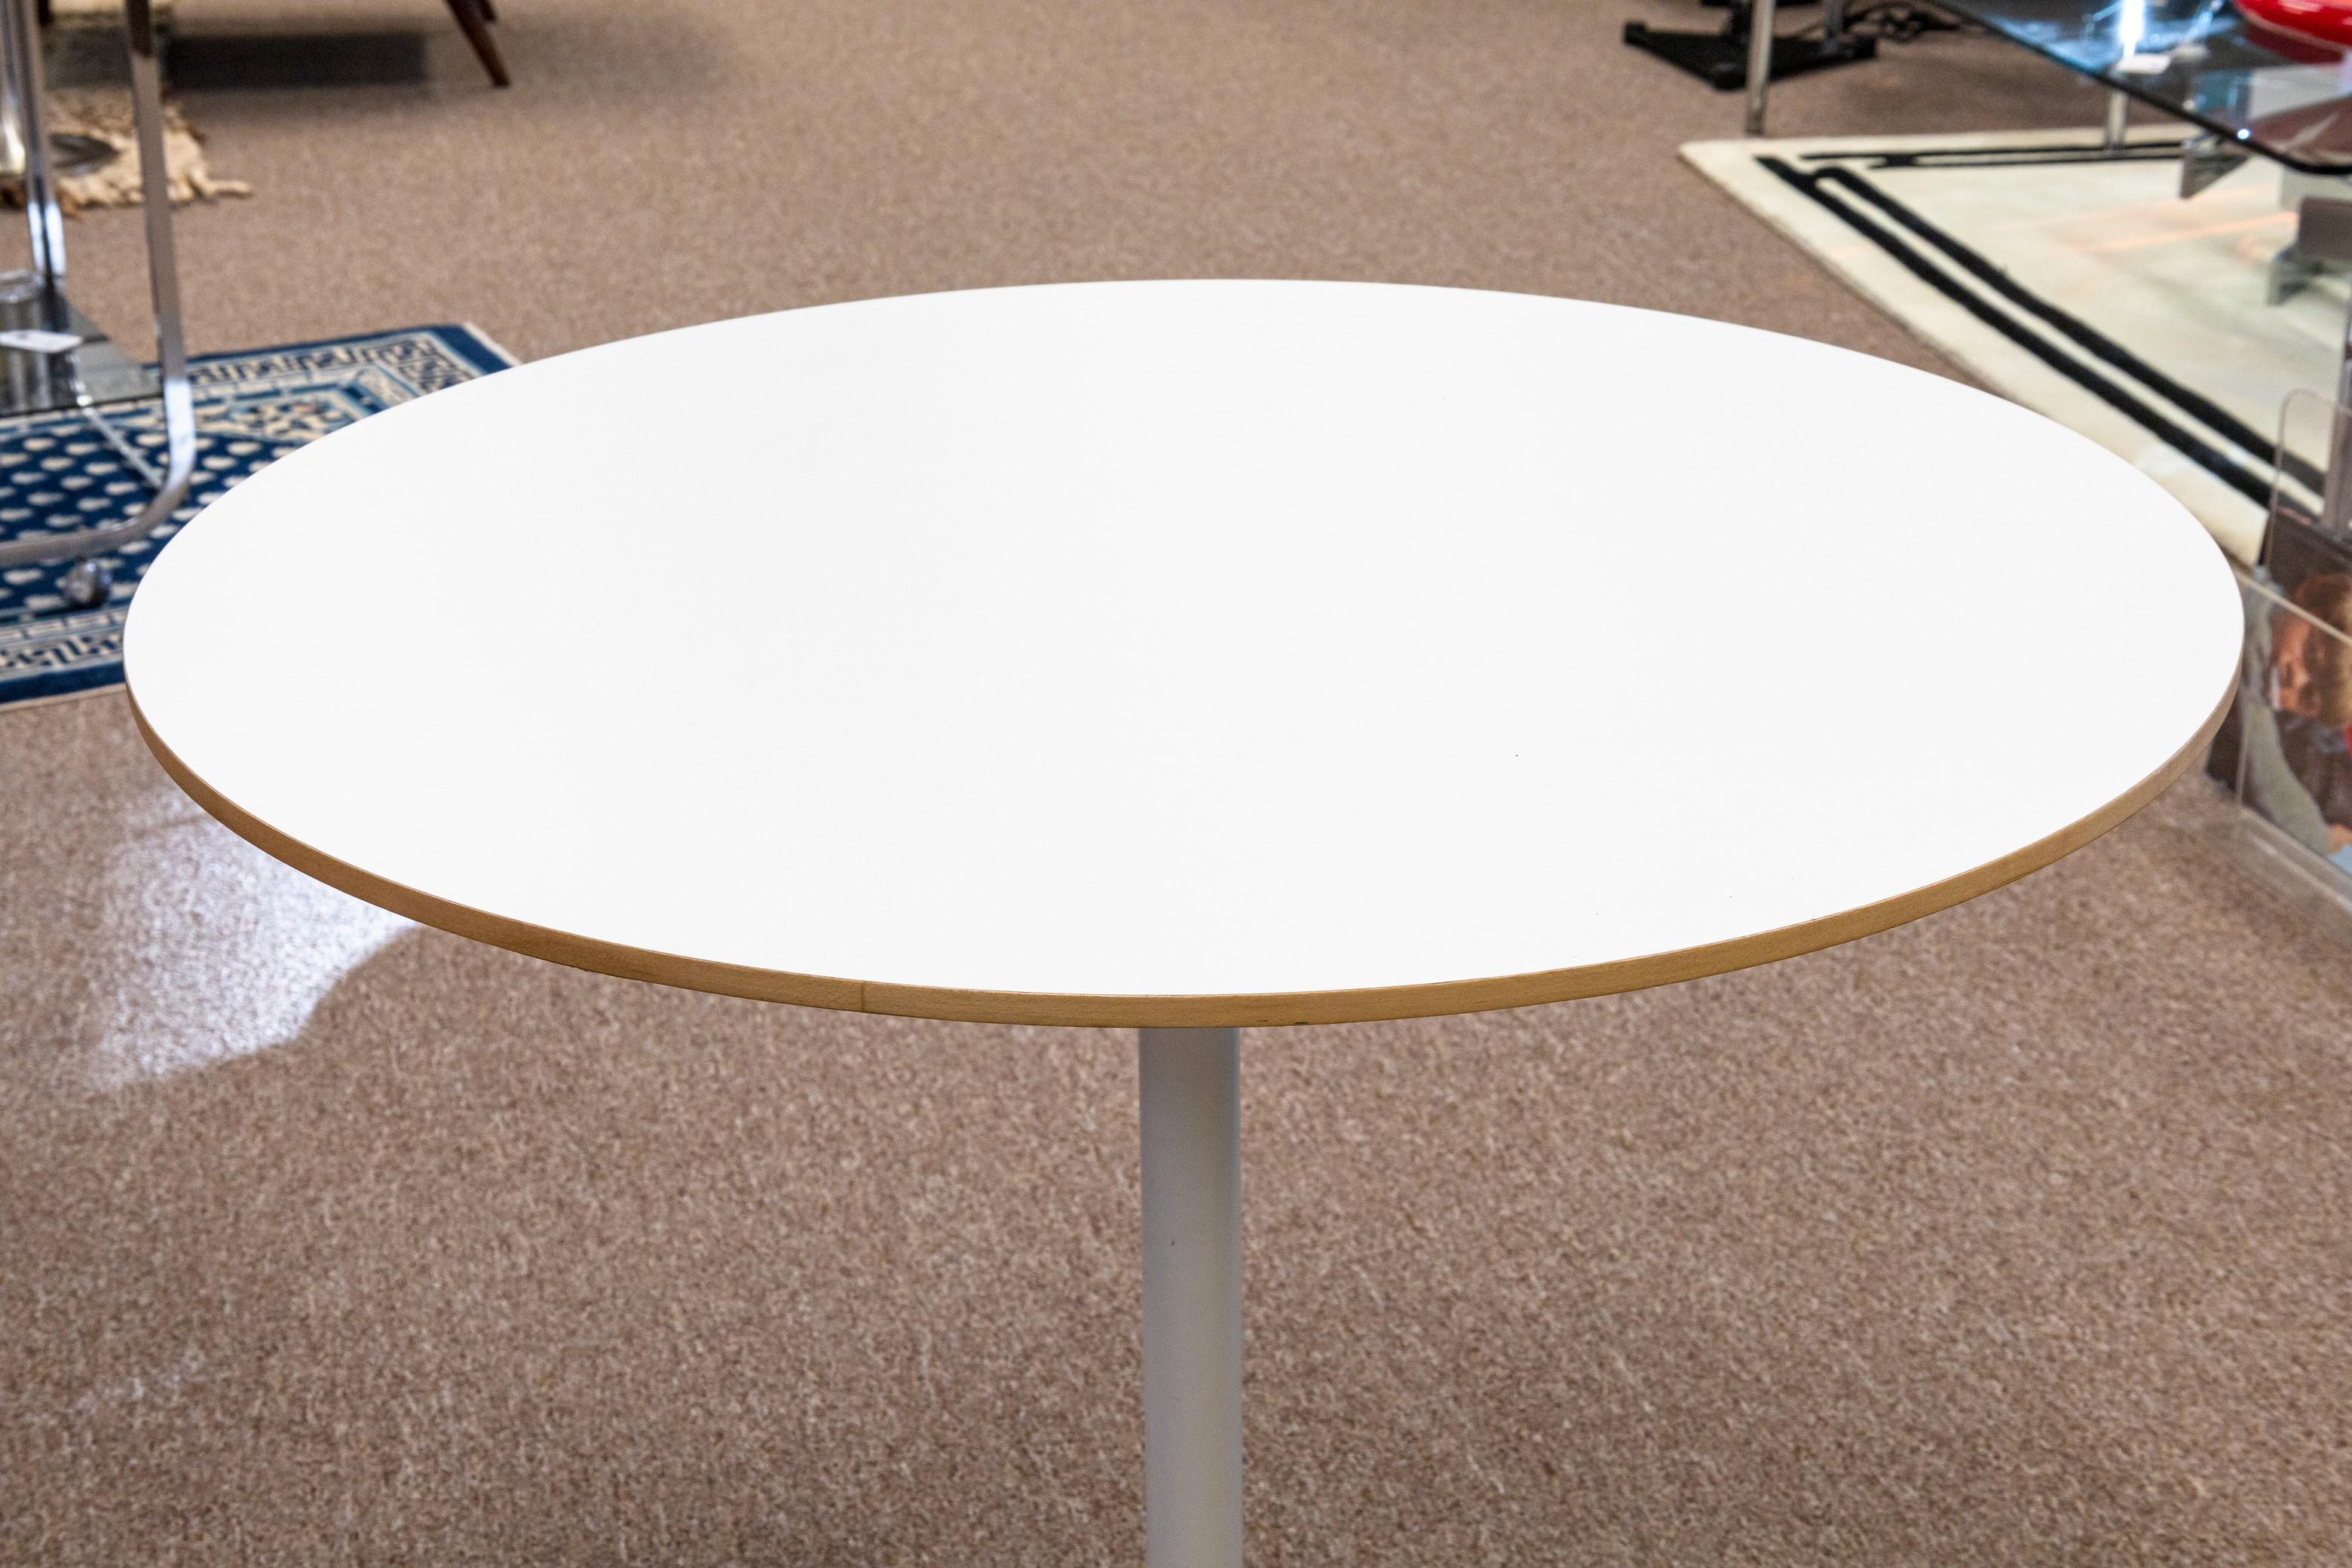 A George Nelson for Herman Miller pedestal dinette table. A fantastic little table with a white laminate table top, a wooden table, and a white aluminum base with x-shaped legs. This piece includes the original tagging on the underside as pictured